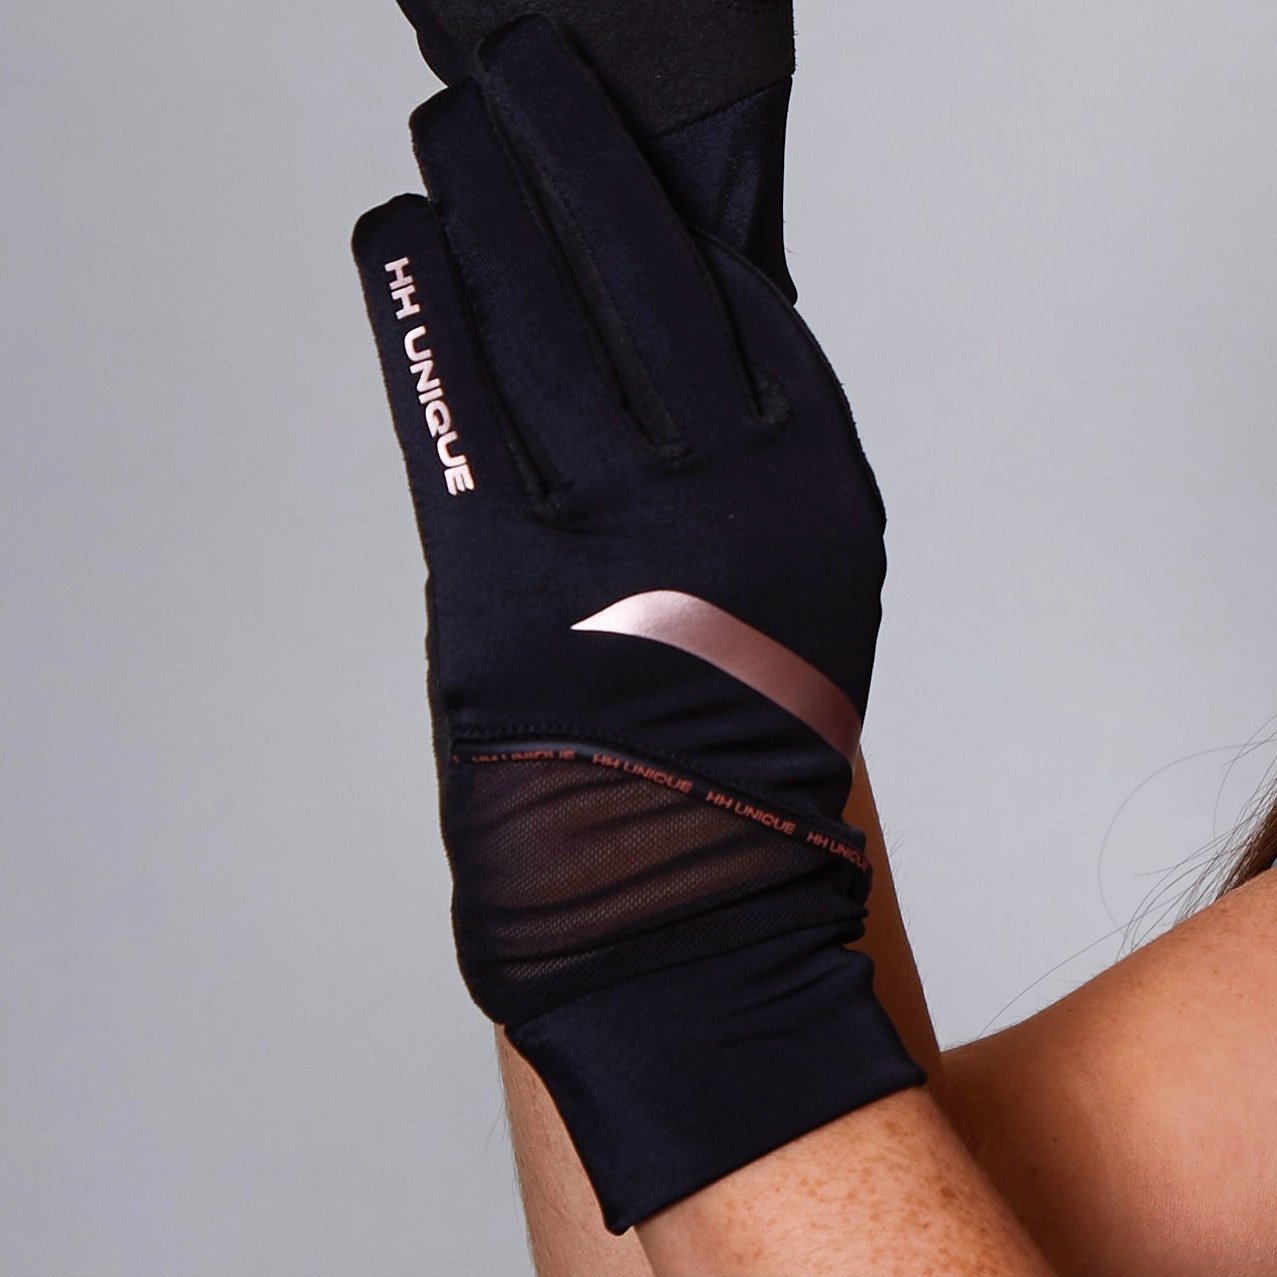 Black and Rose Gold riding gloves.  Photo shows left hand, HH unique logo runs down little finger and a rose gold strip diagonally across the top of the hand.  Mesh towards the wrist with a comfortable cuff around the wrist.